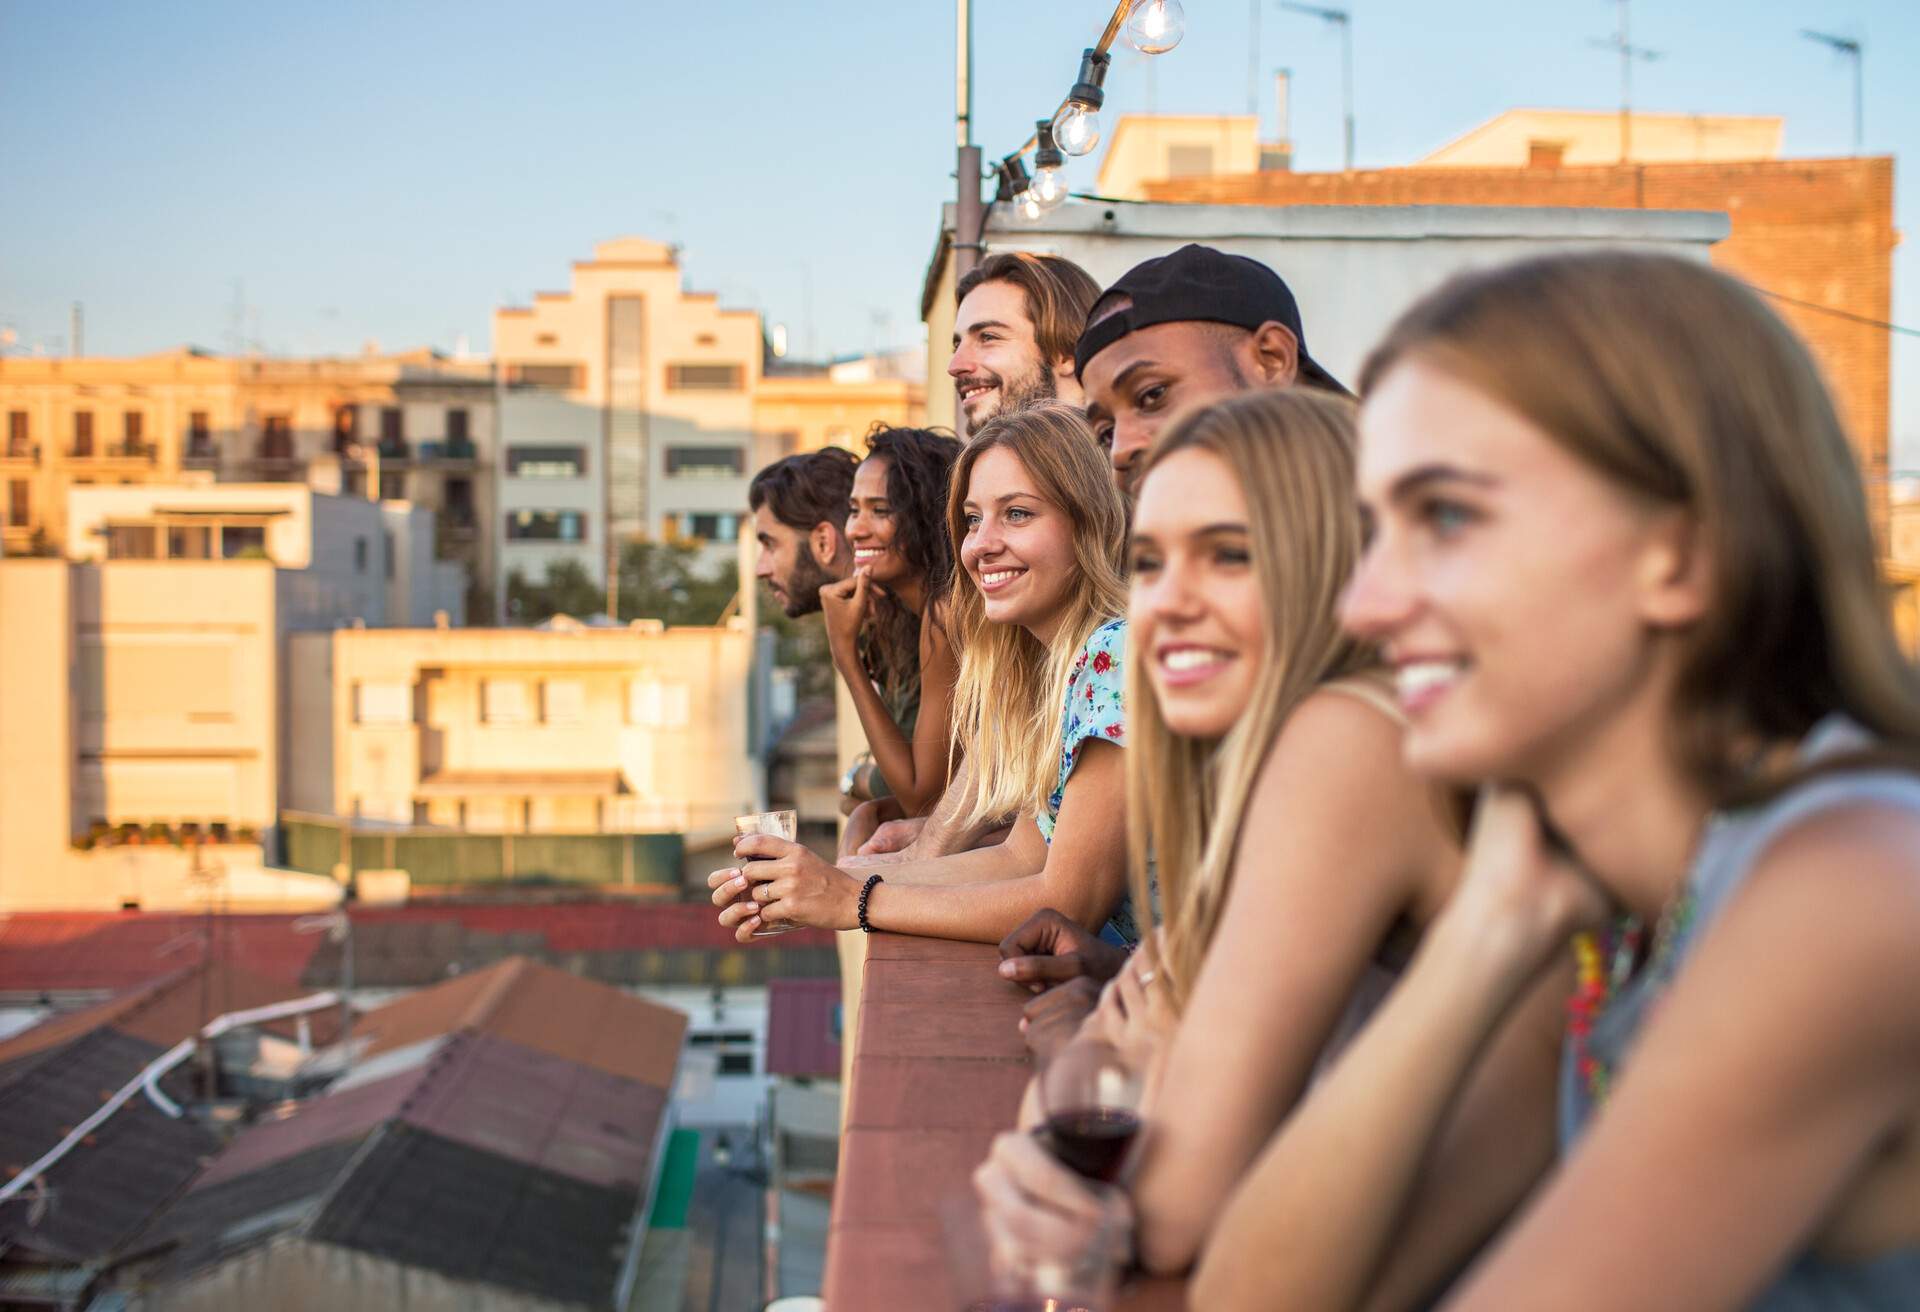 A circle of friends lined up on the rooftop overlooking the surrounding houses.